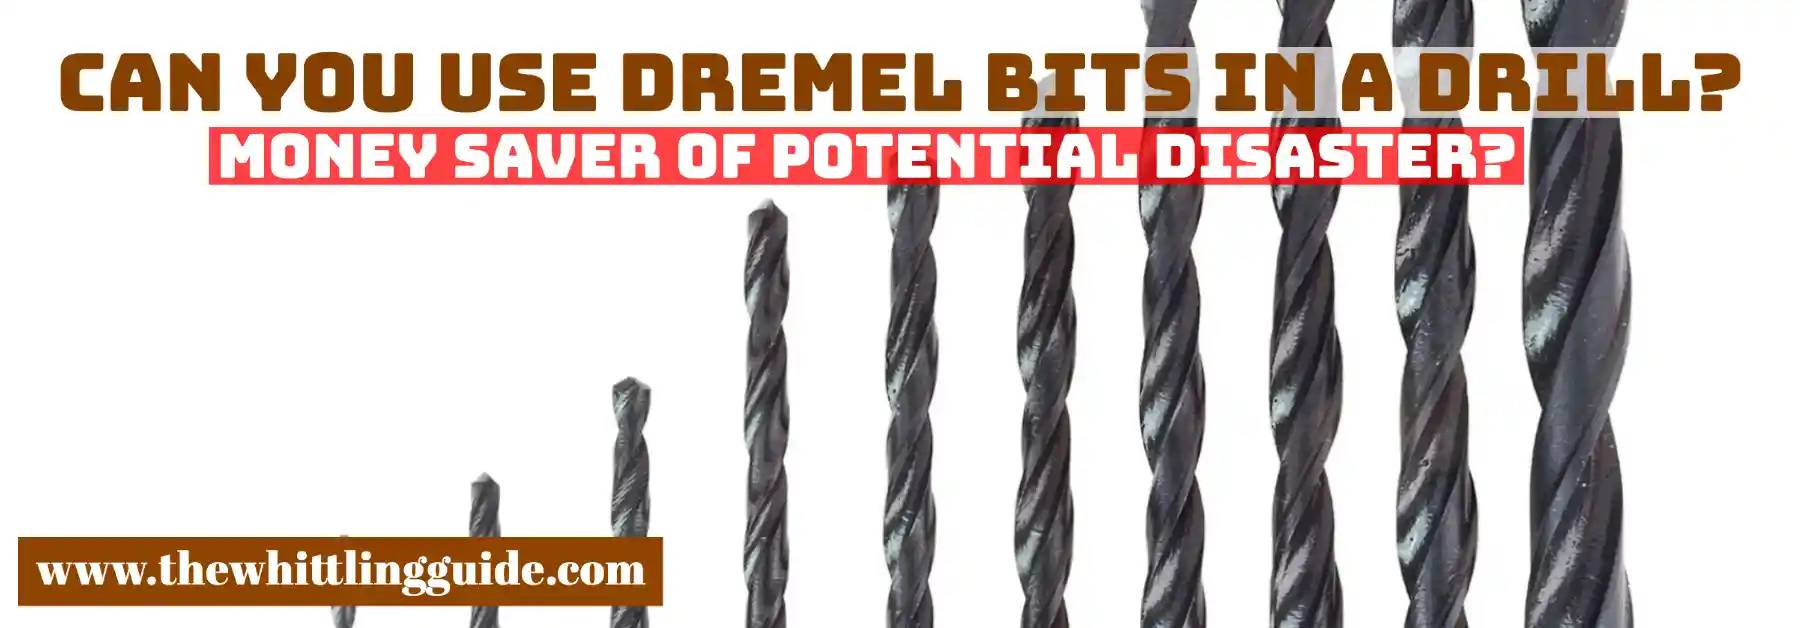 Can you use Dremel bits in a drill? | Money Saver of Potential Disaster?